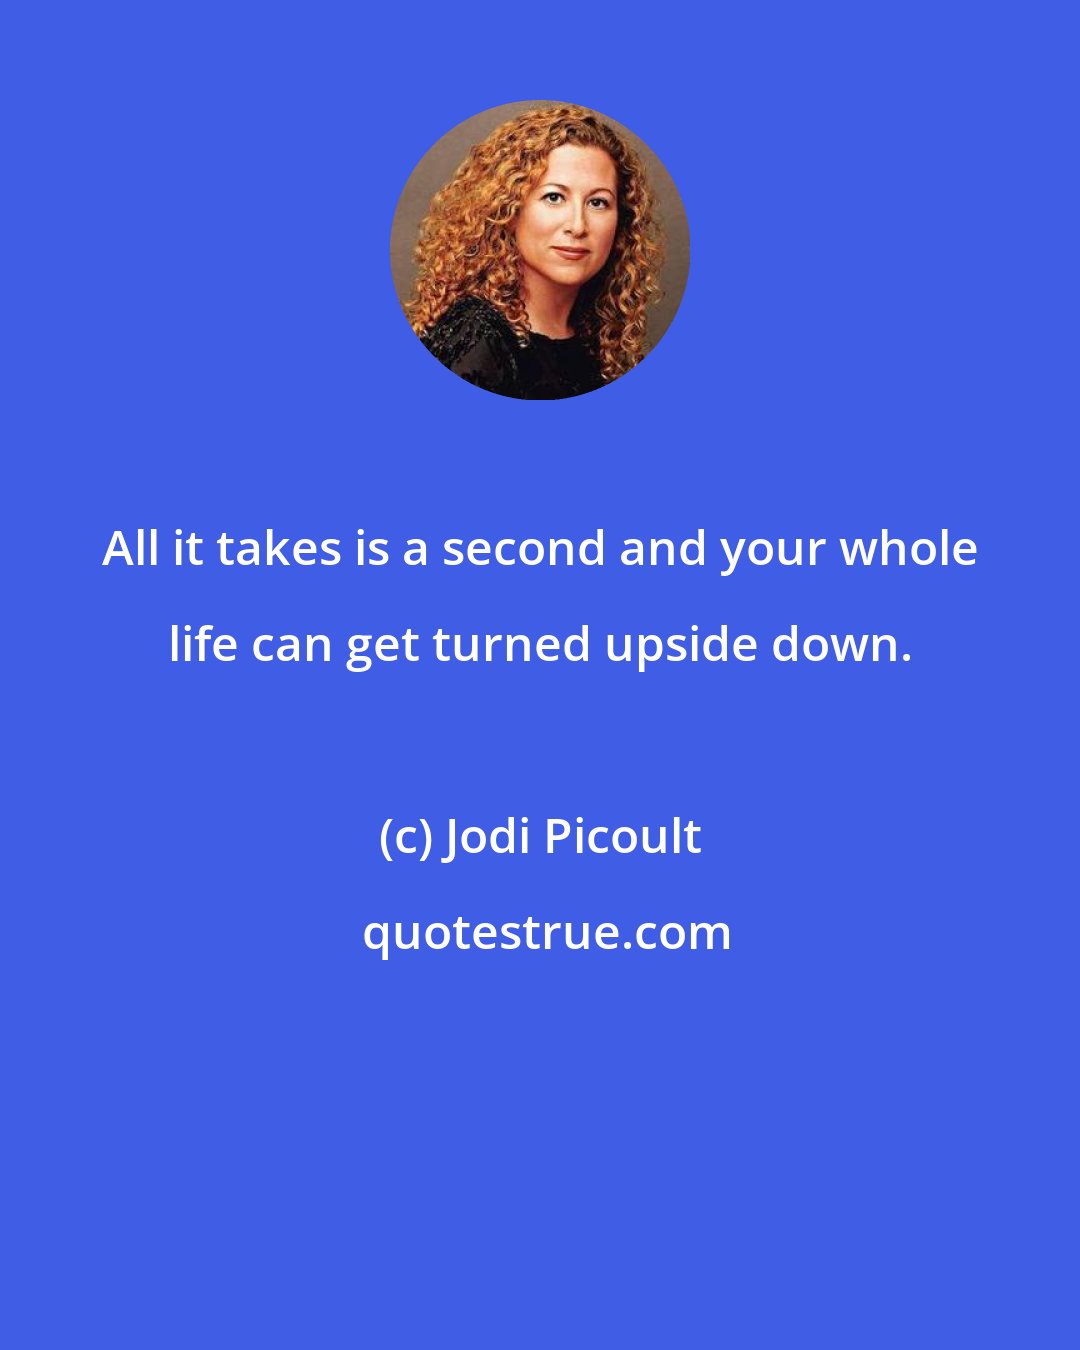 Jodi Picoult: All it takes is a second and your whole life can get turned upside down.